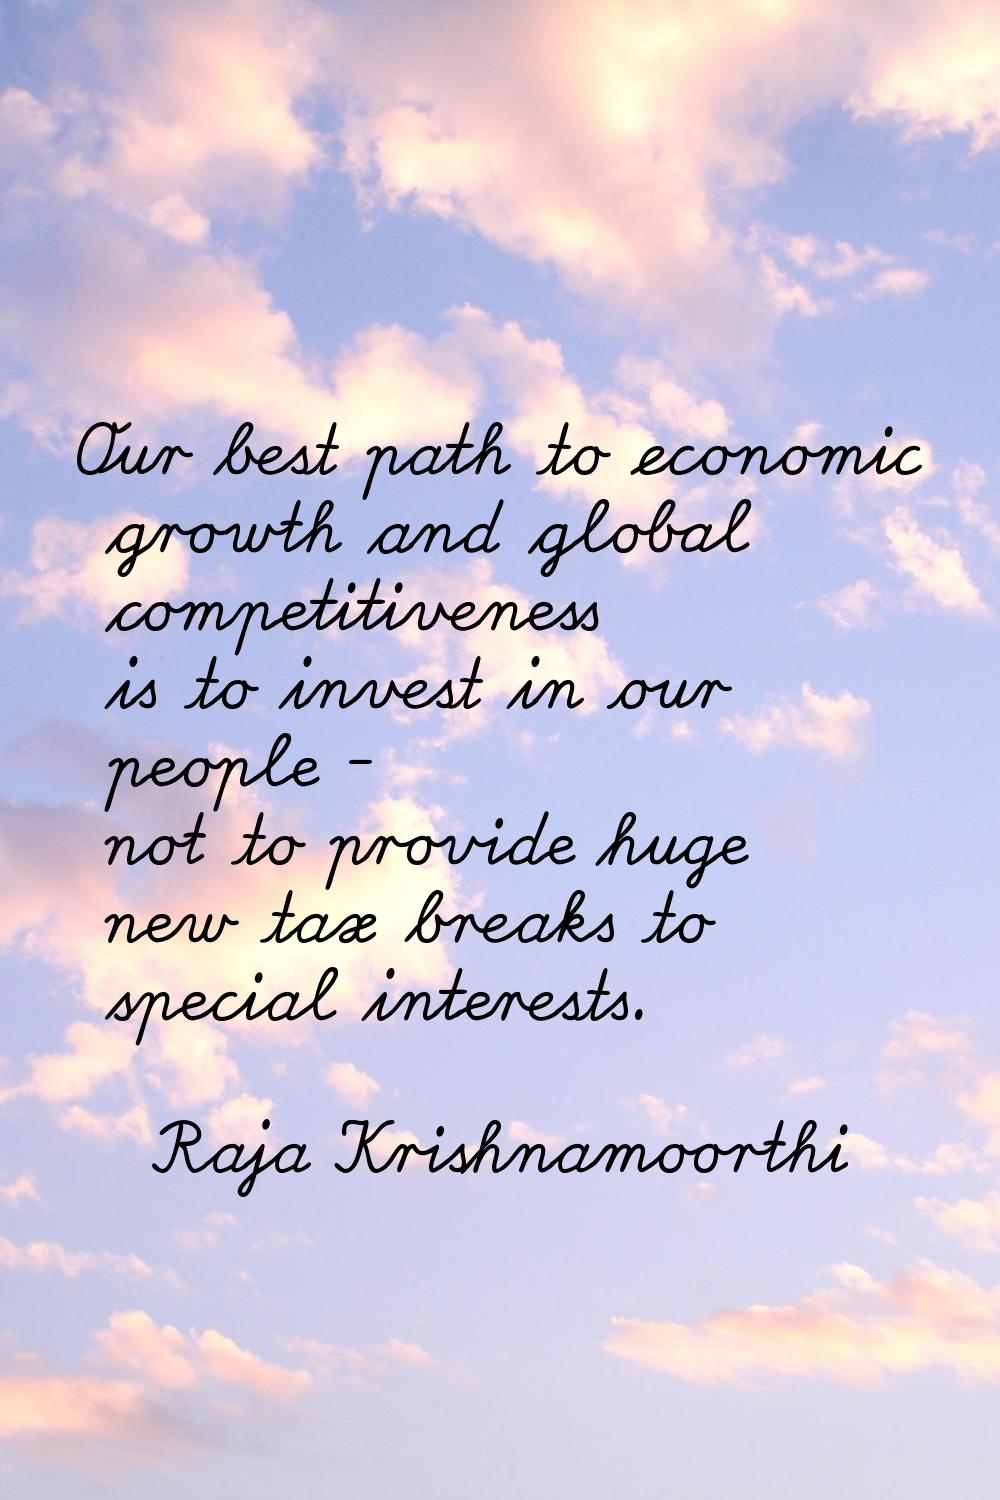 Our best path to economic growth and global competitiveness is to invest in our people - not to pro